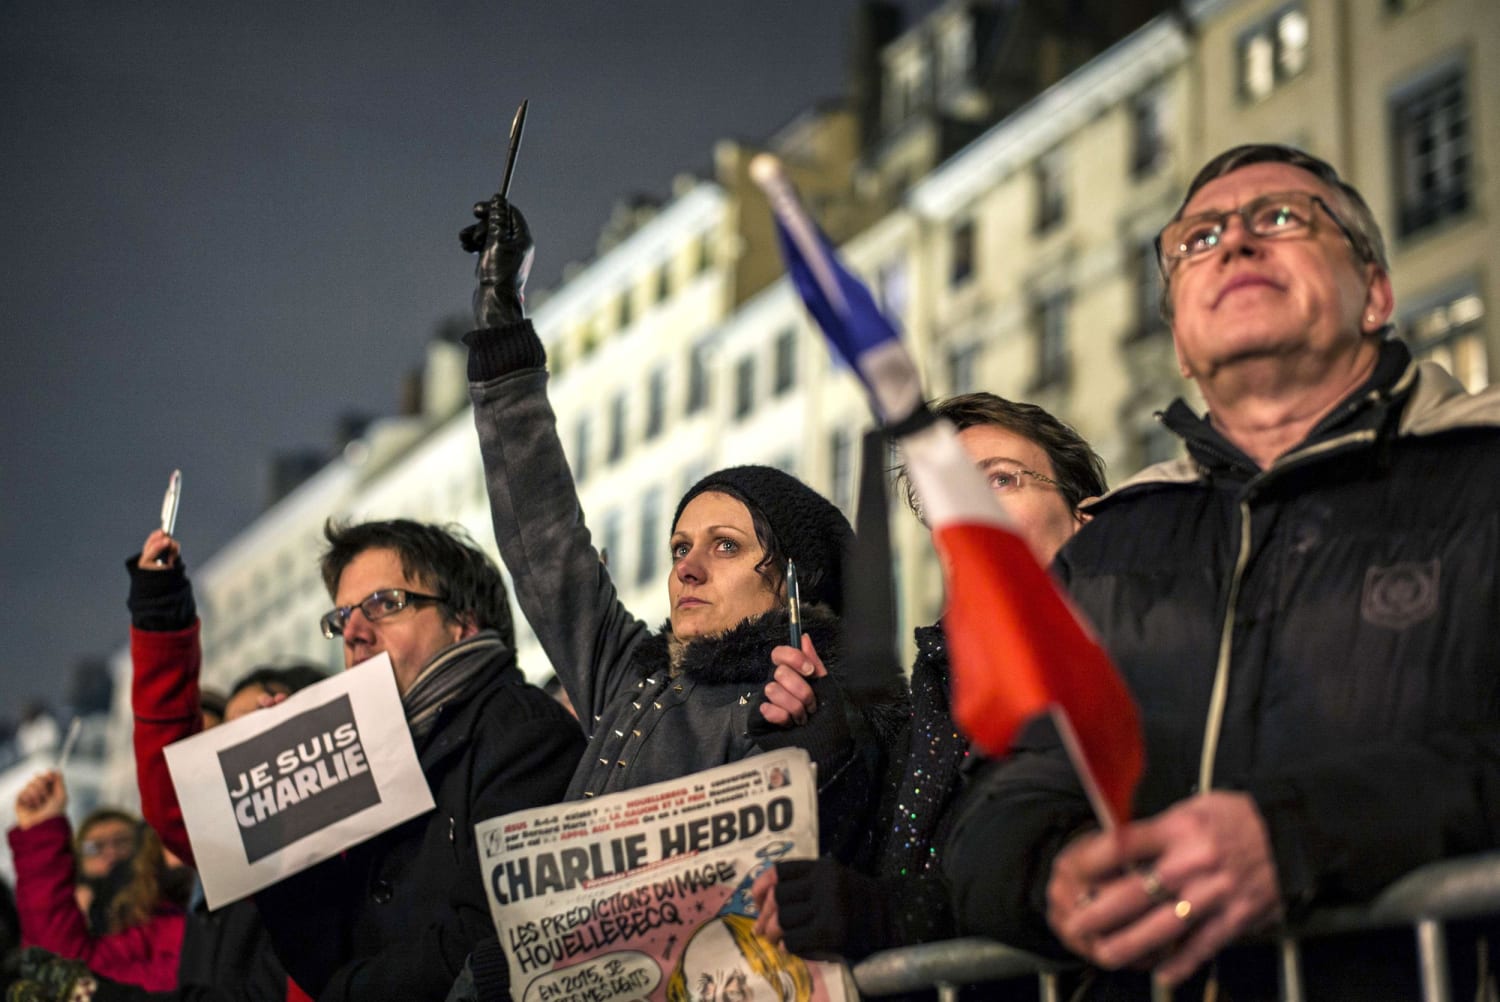 New Charlie Hebdo Issue Skewers PEN Critics - The New York Times